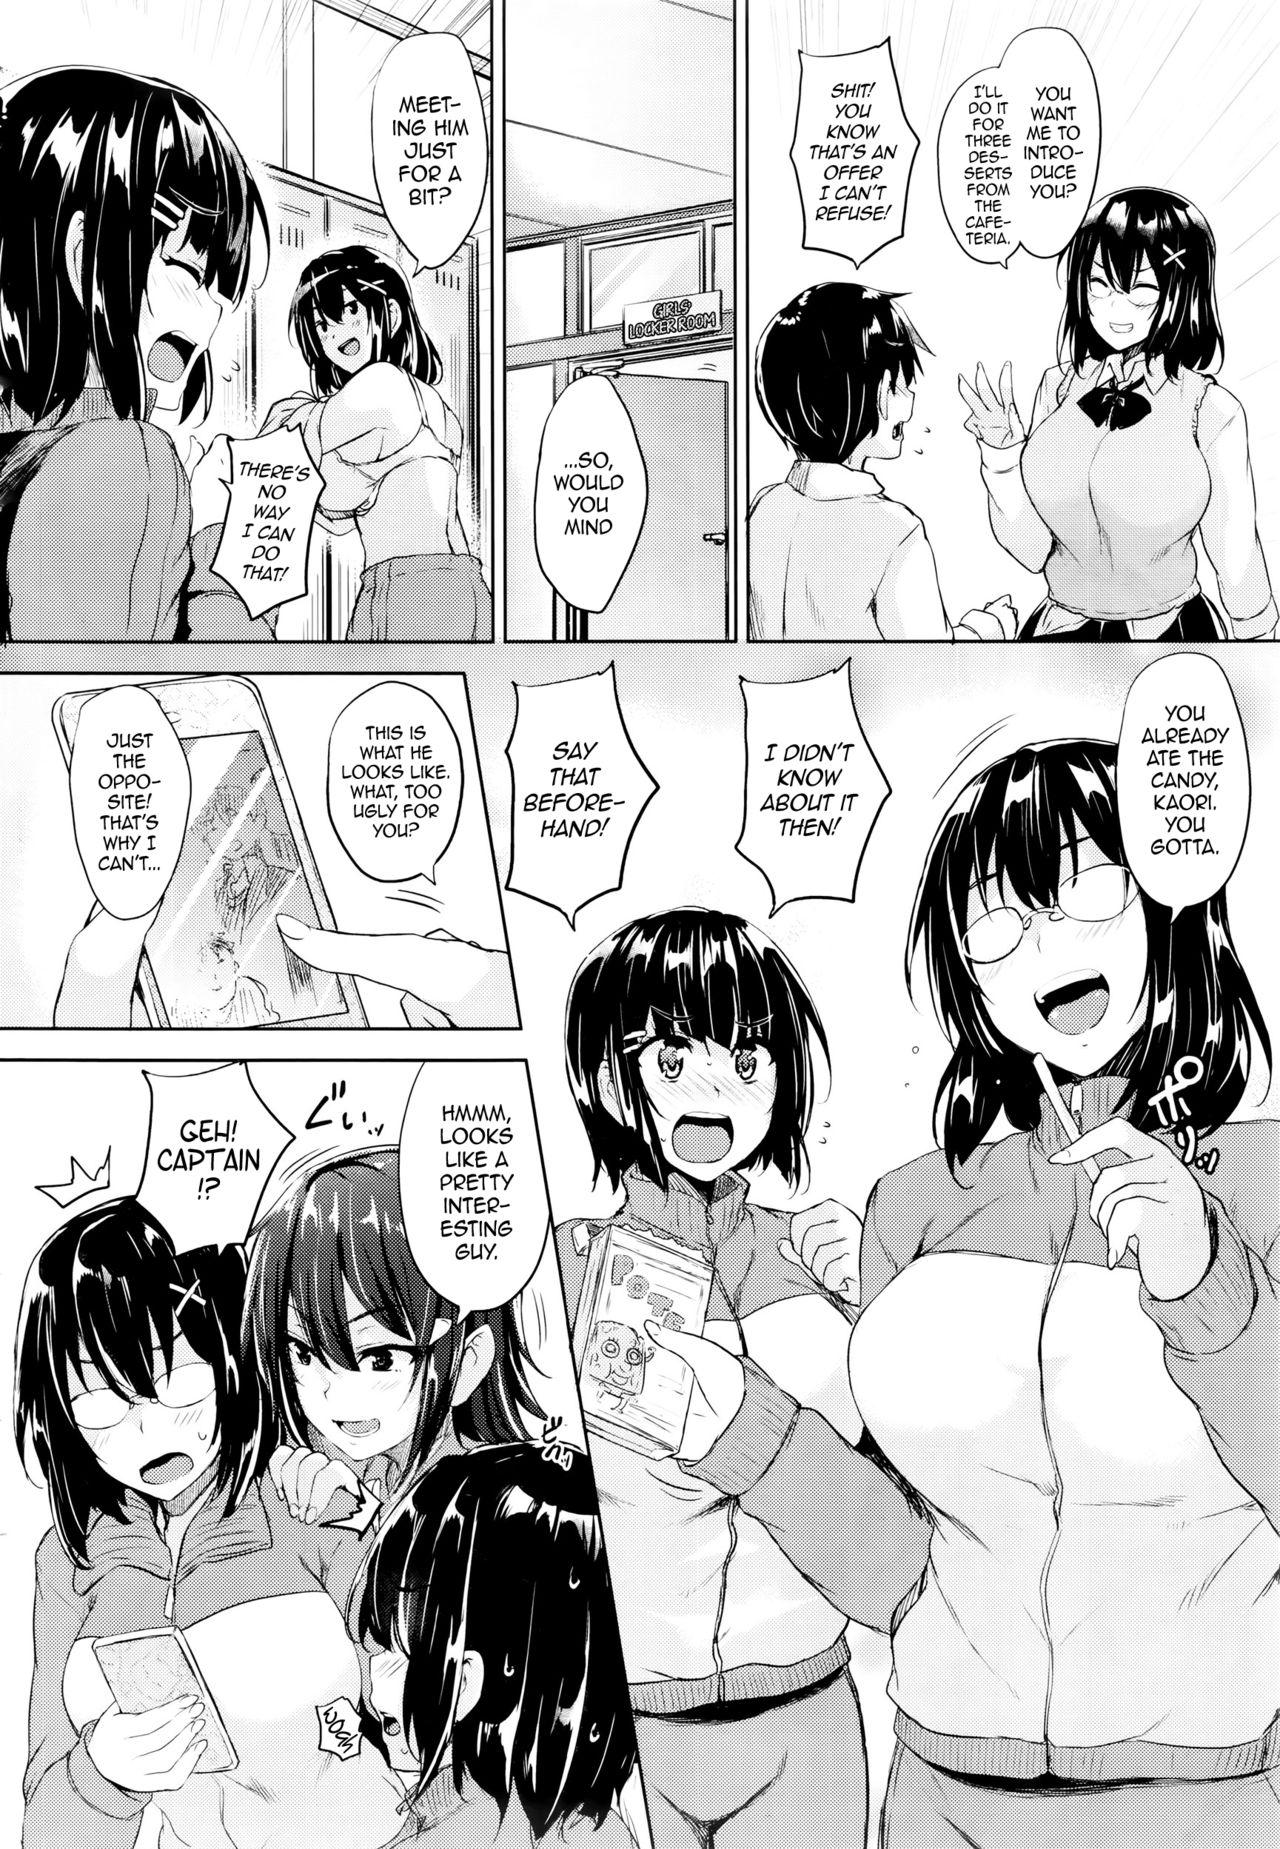 Oral Porn Twin Ball Love Attack Ch. 1-3 Blowing - Page 2